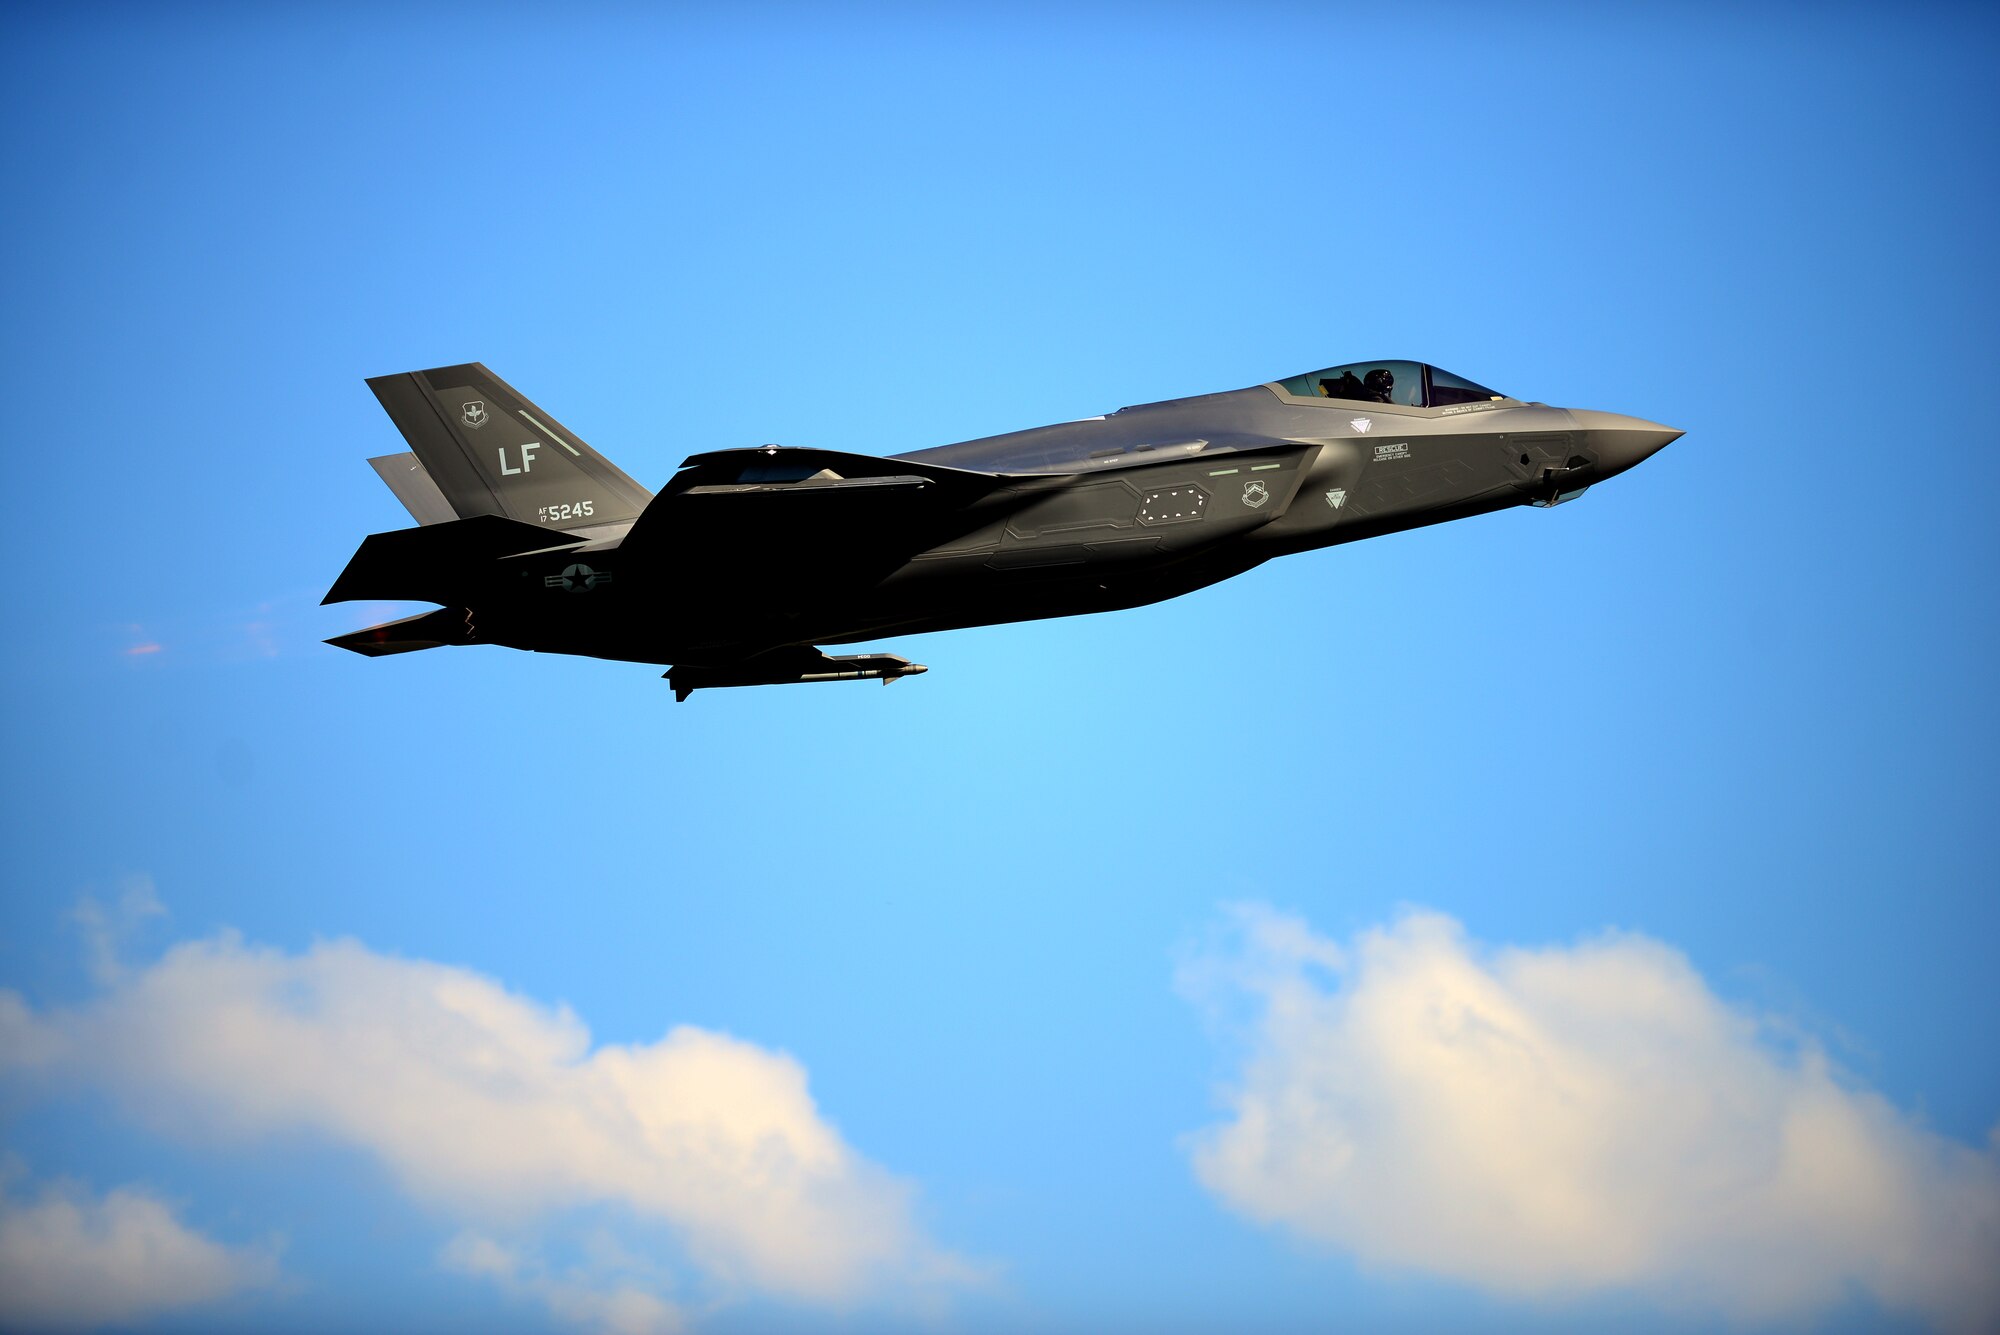 An F-35A Lightning II from the 388th and 419th Fighter Wings, at Hill AFB, Utah, takes off on the first day of Astral Knight 19 at Aviano Air Base, Italy, on June 3, 2019. The F-35’s 5th generation abilities is key to air dominance and precision engagement in highly contested environments. (U.S. Air Force photo by Airman 1st Class Caleb House)